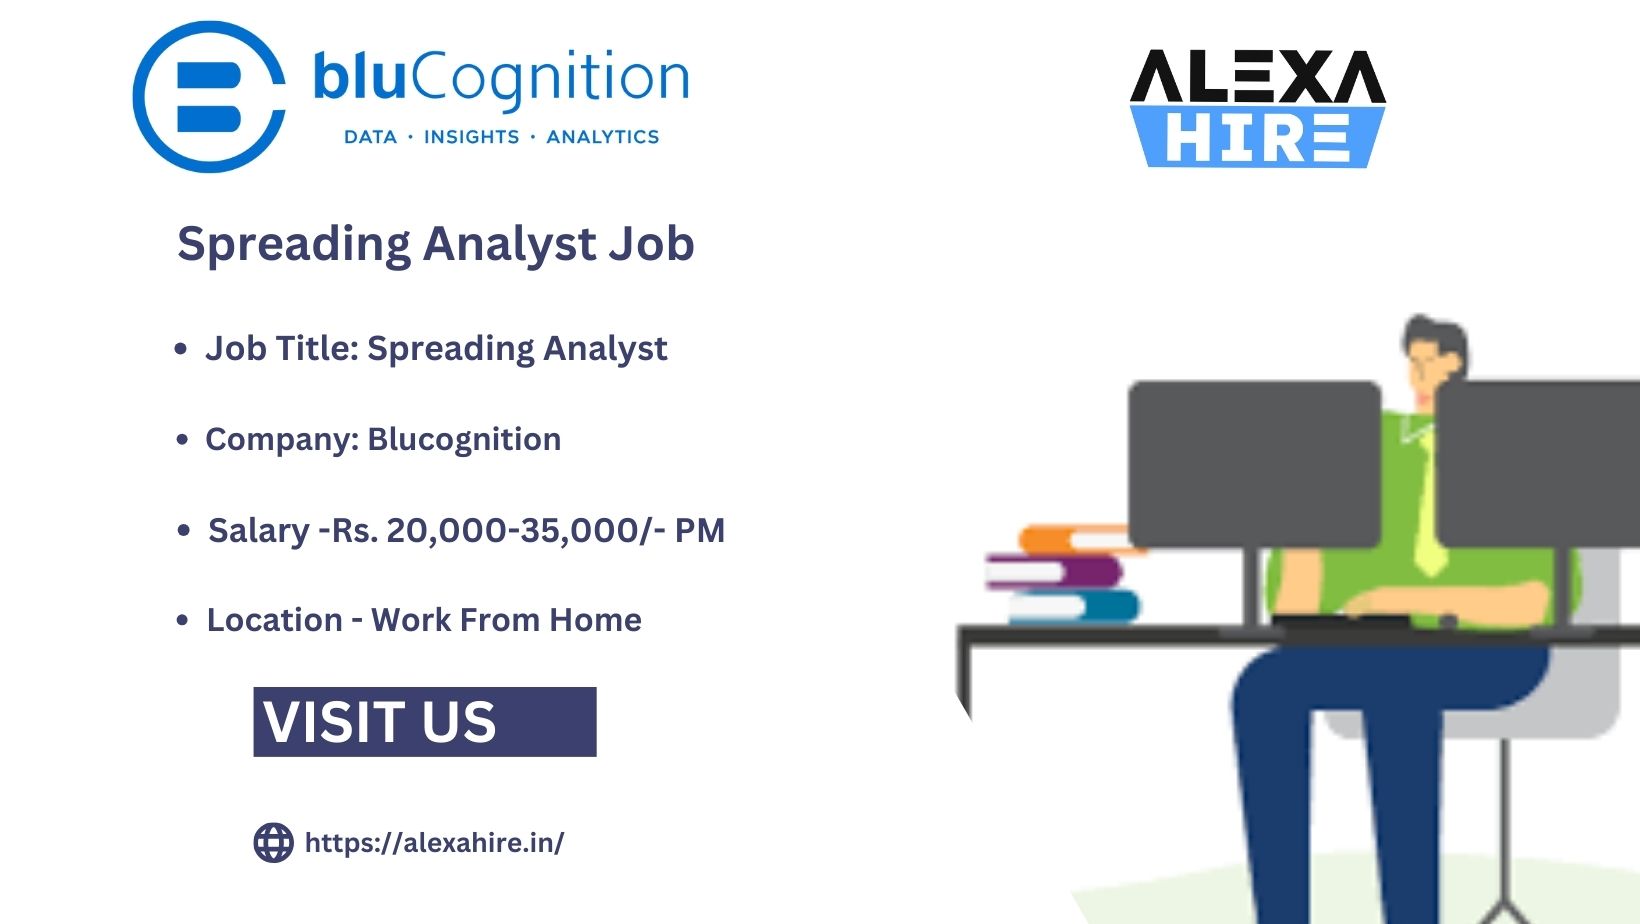 BLUCOGNITION Hiring Spreading Analyst Job| Apply Right Now